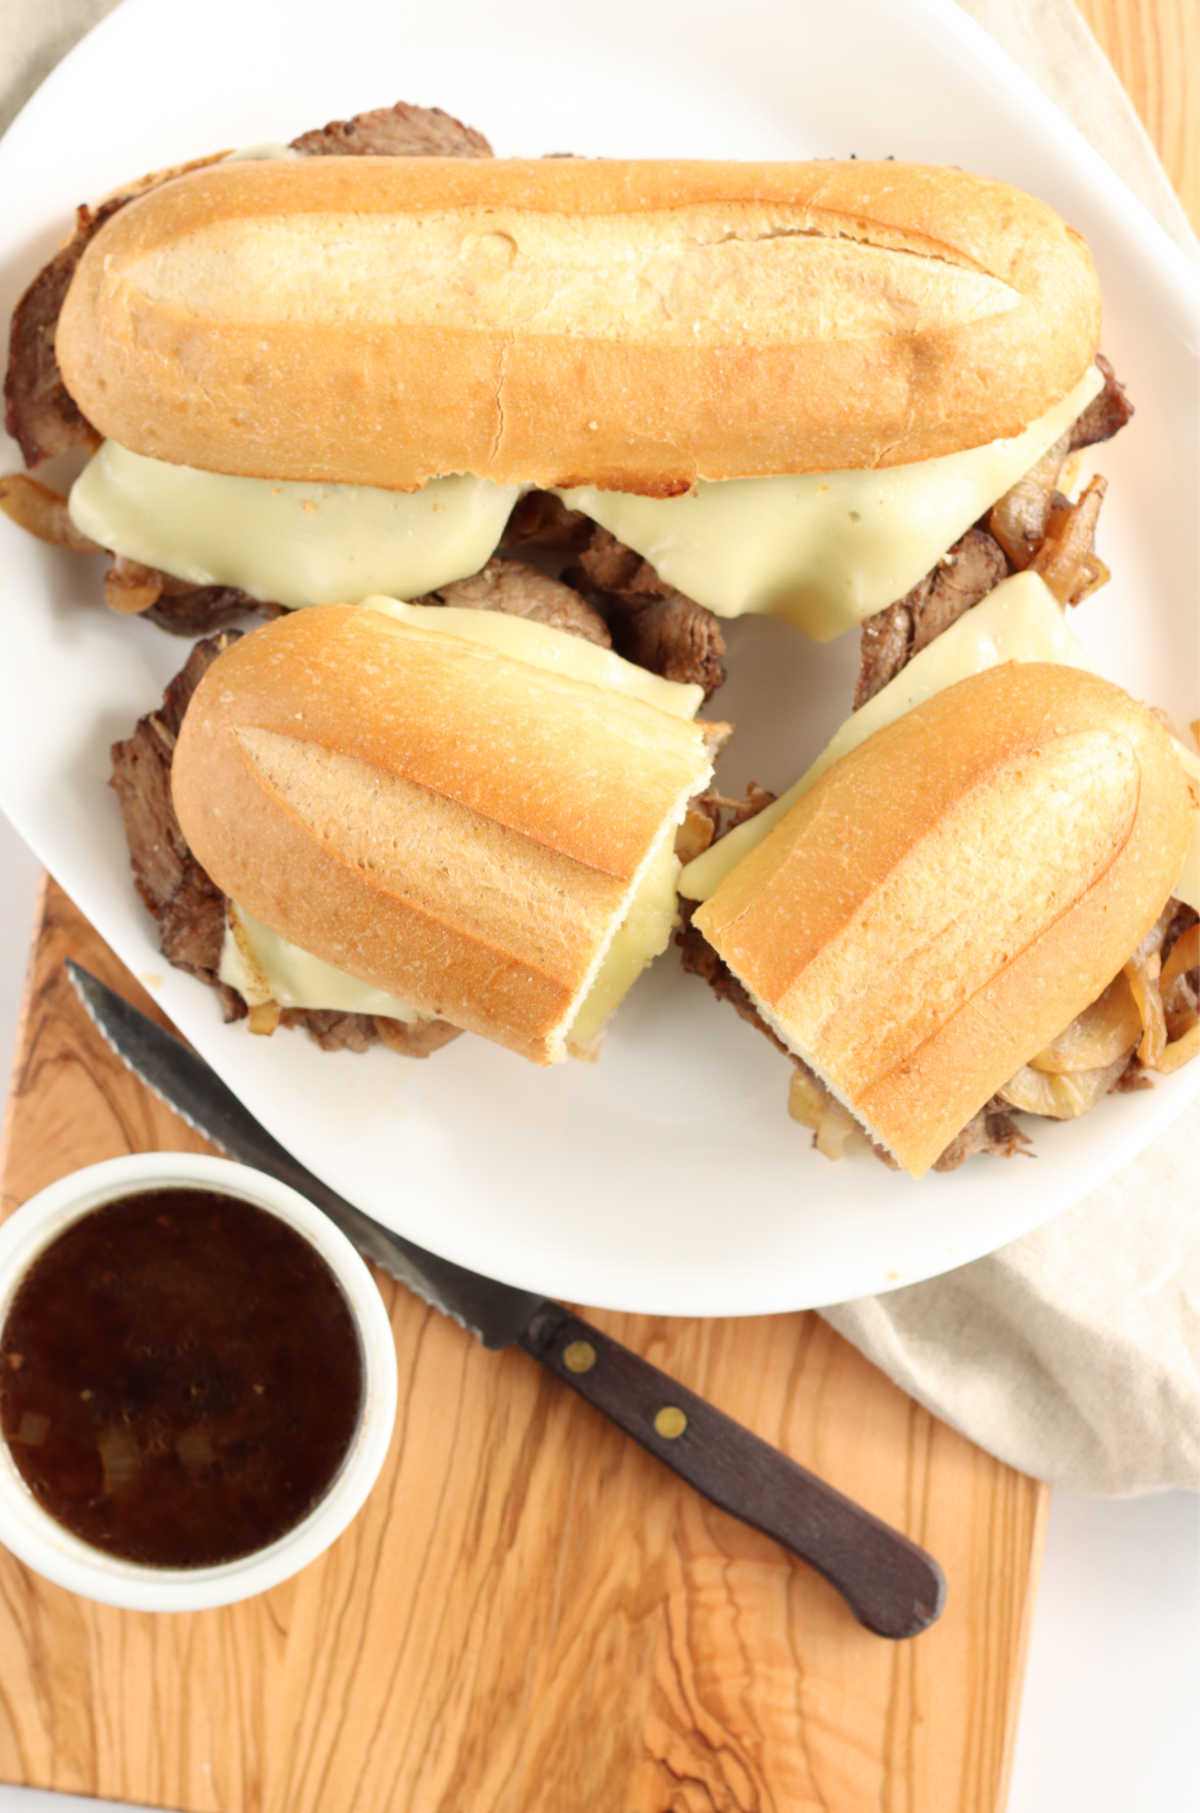 Easy to make French dip is made with chuck roast, onion soup mix, simple spices and slow cooked.